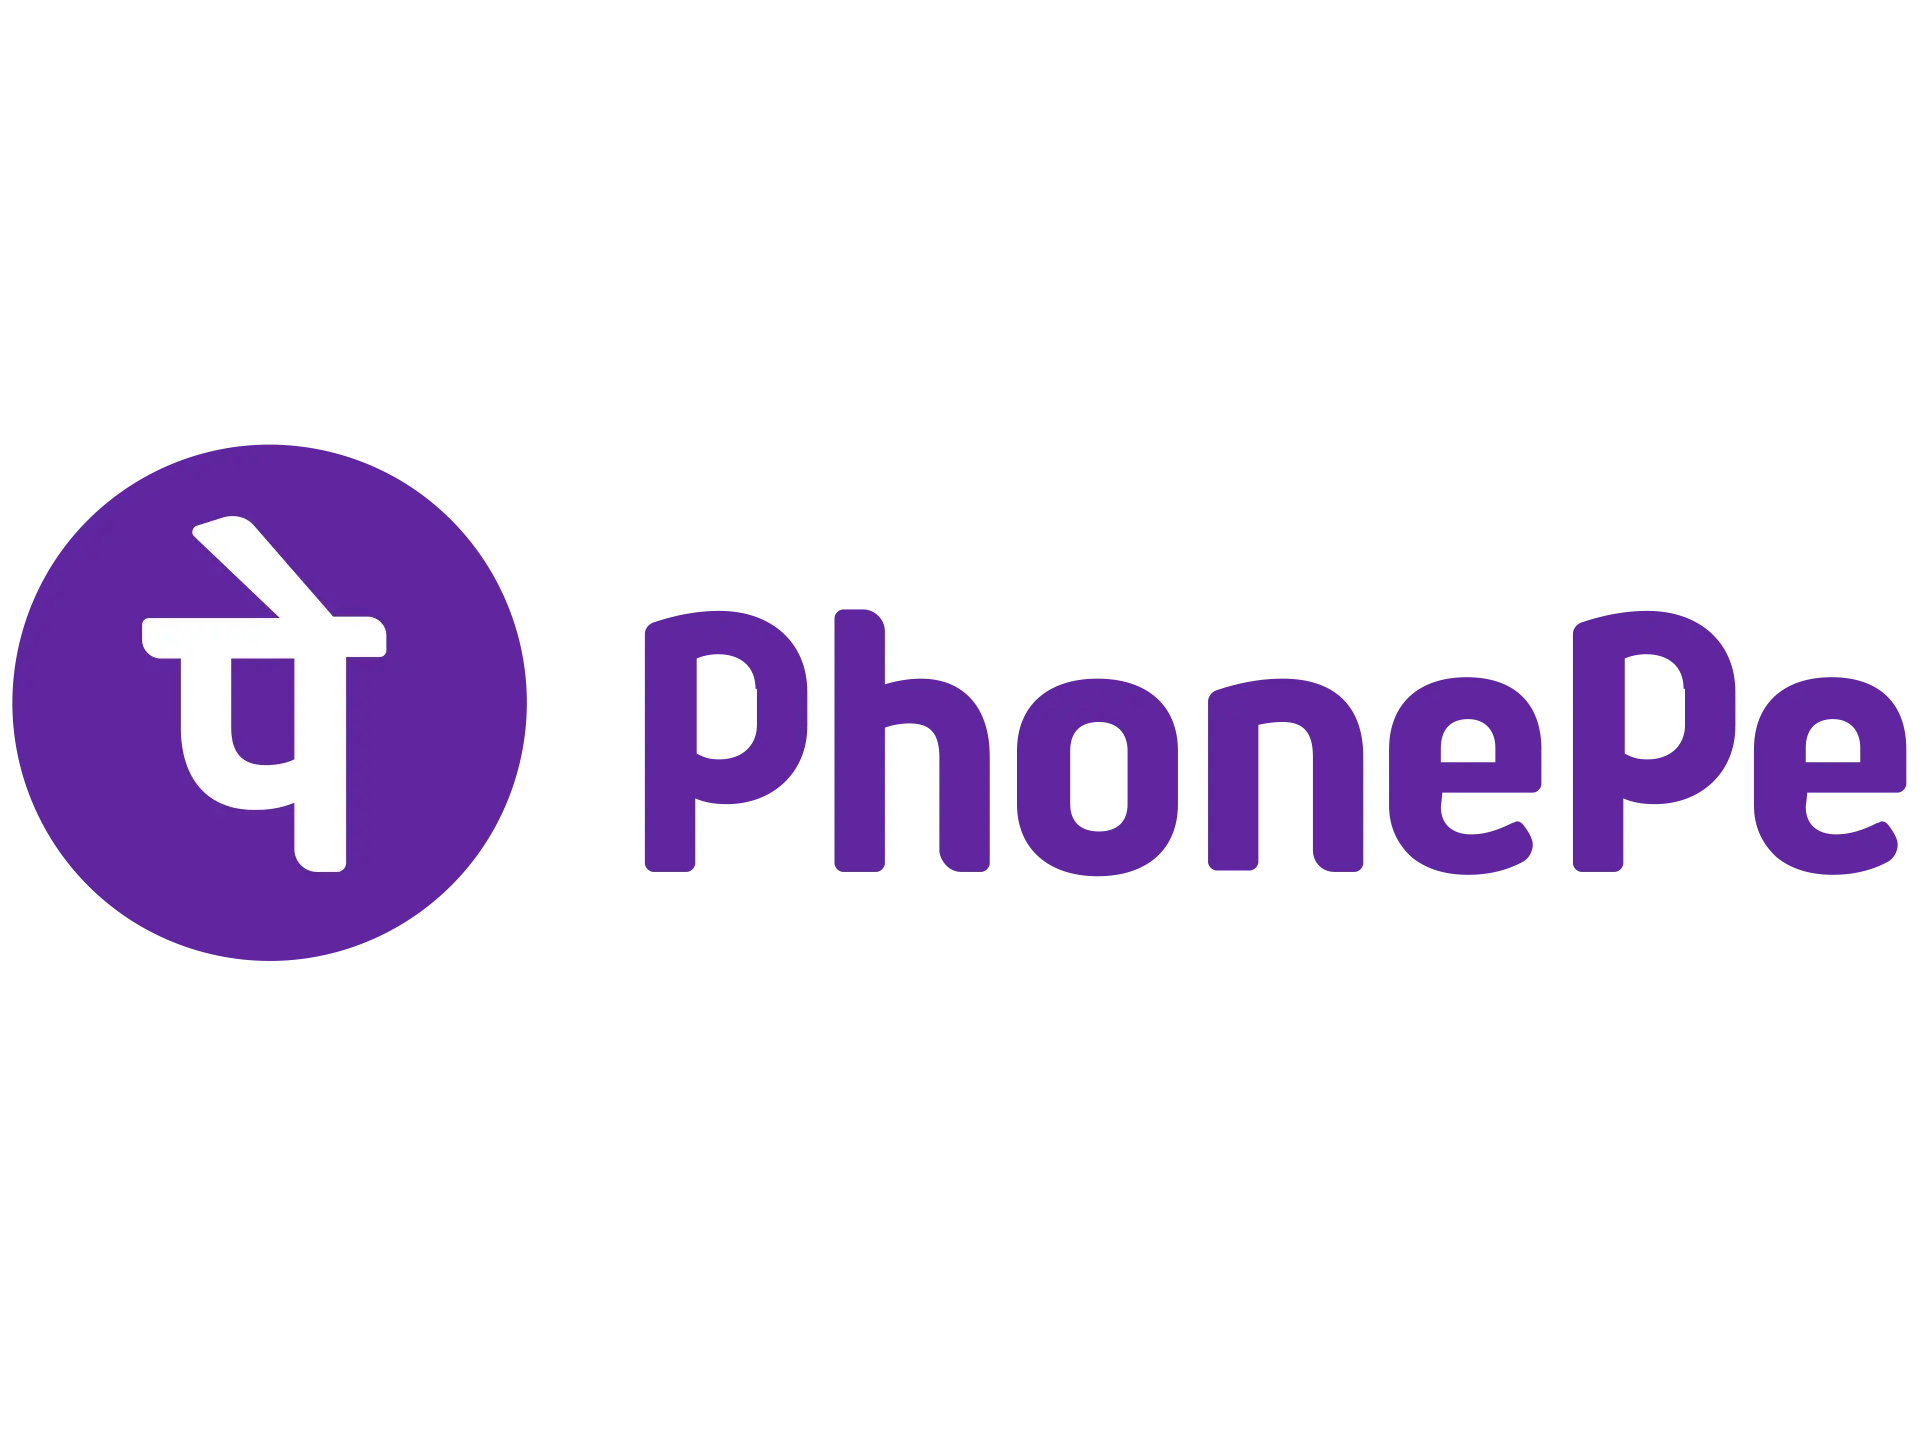 PhonePe, an Indian fintech, offers e-wallet services, gaining fame and reputation since its 2015 inception.